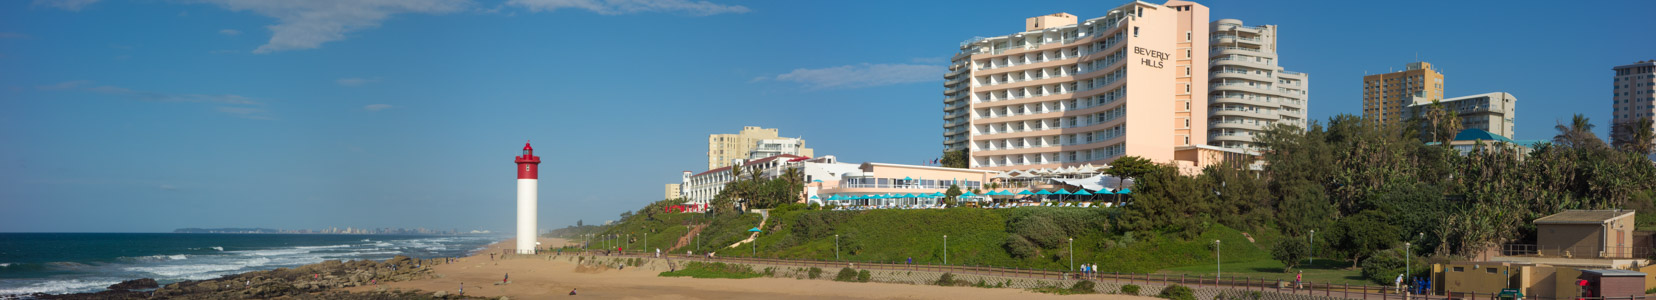 Umhlanga Beach from the Pier - 6/2016